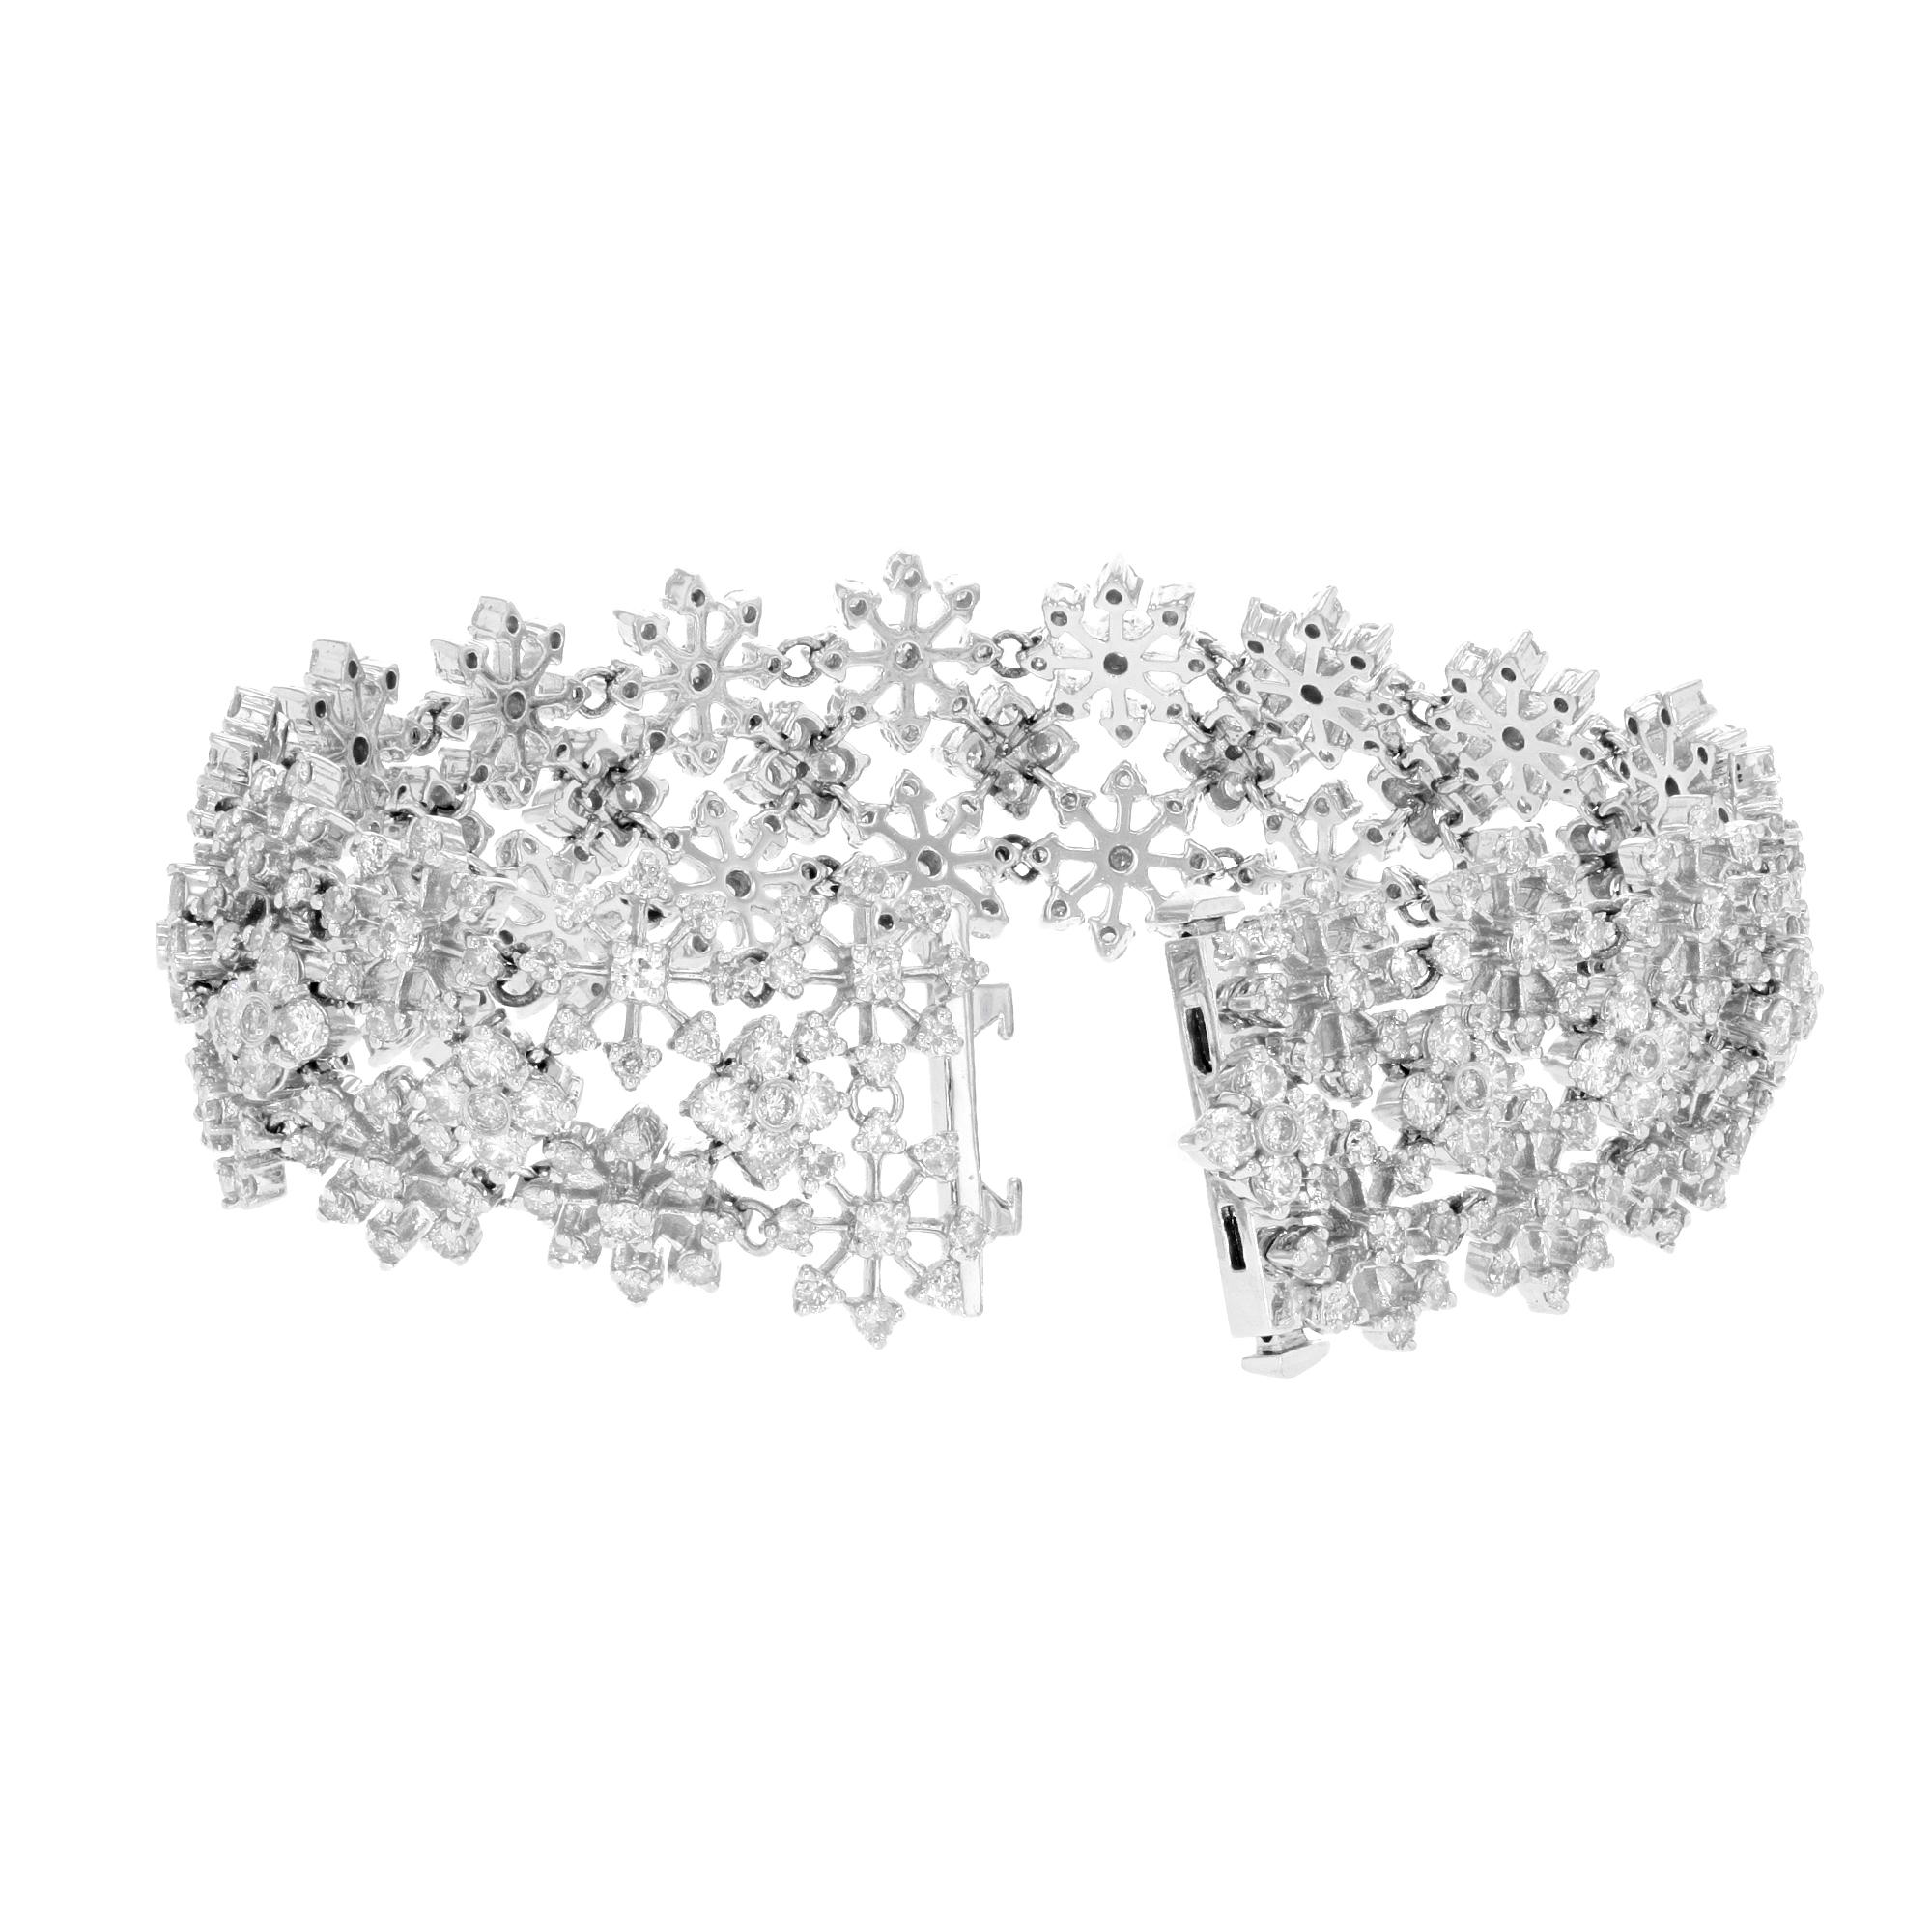 A glittering and glamorous late 20th century snowflake diamond bracelet, hand crafted in white gold and bursting with 4.60 carats of bright-white and sparkling round diamonds. Gentle and delicate diamond bracelet is composed of 17 distinct diamond